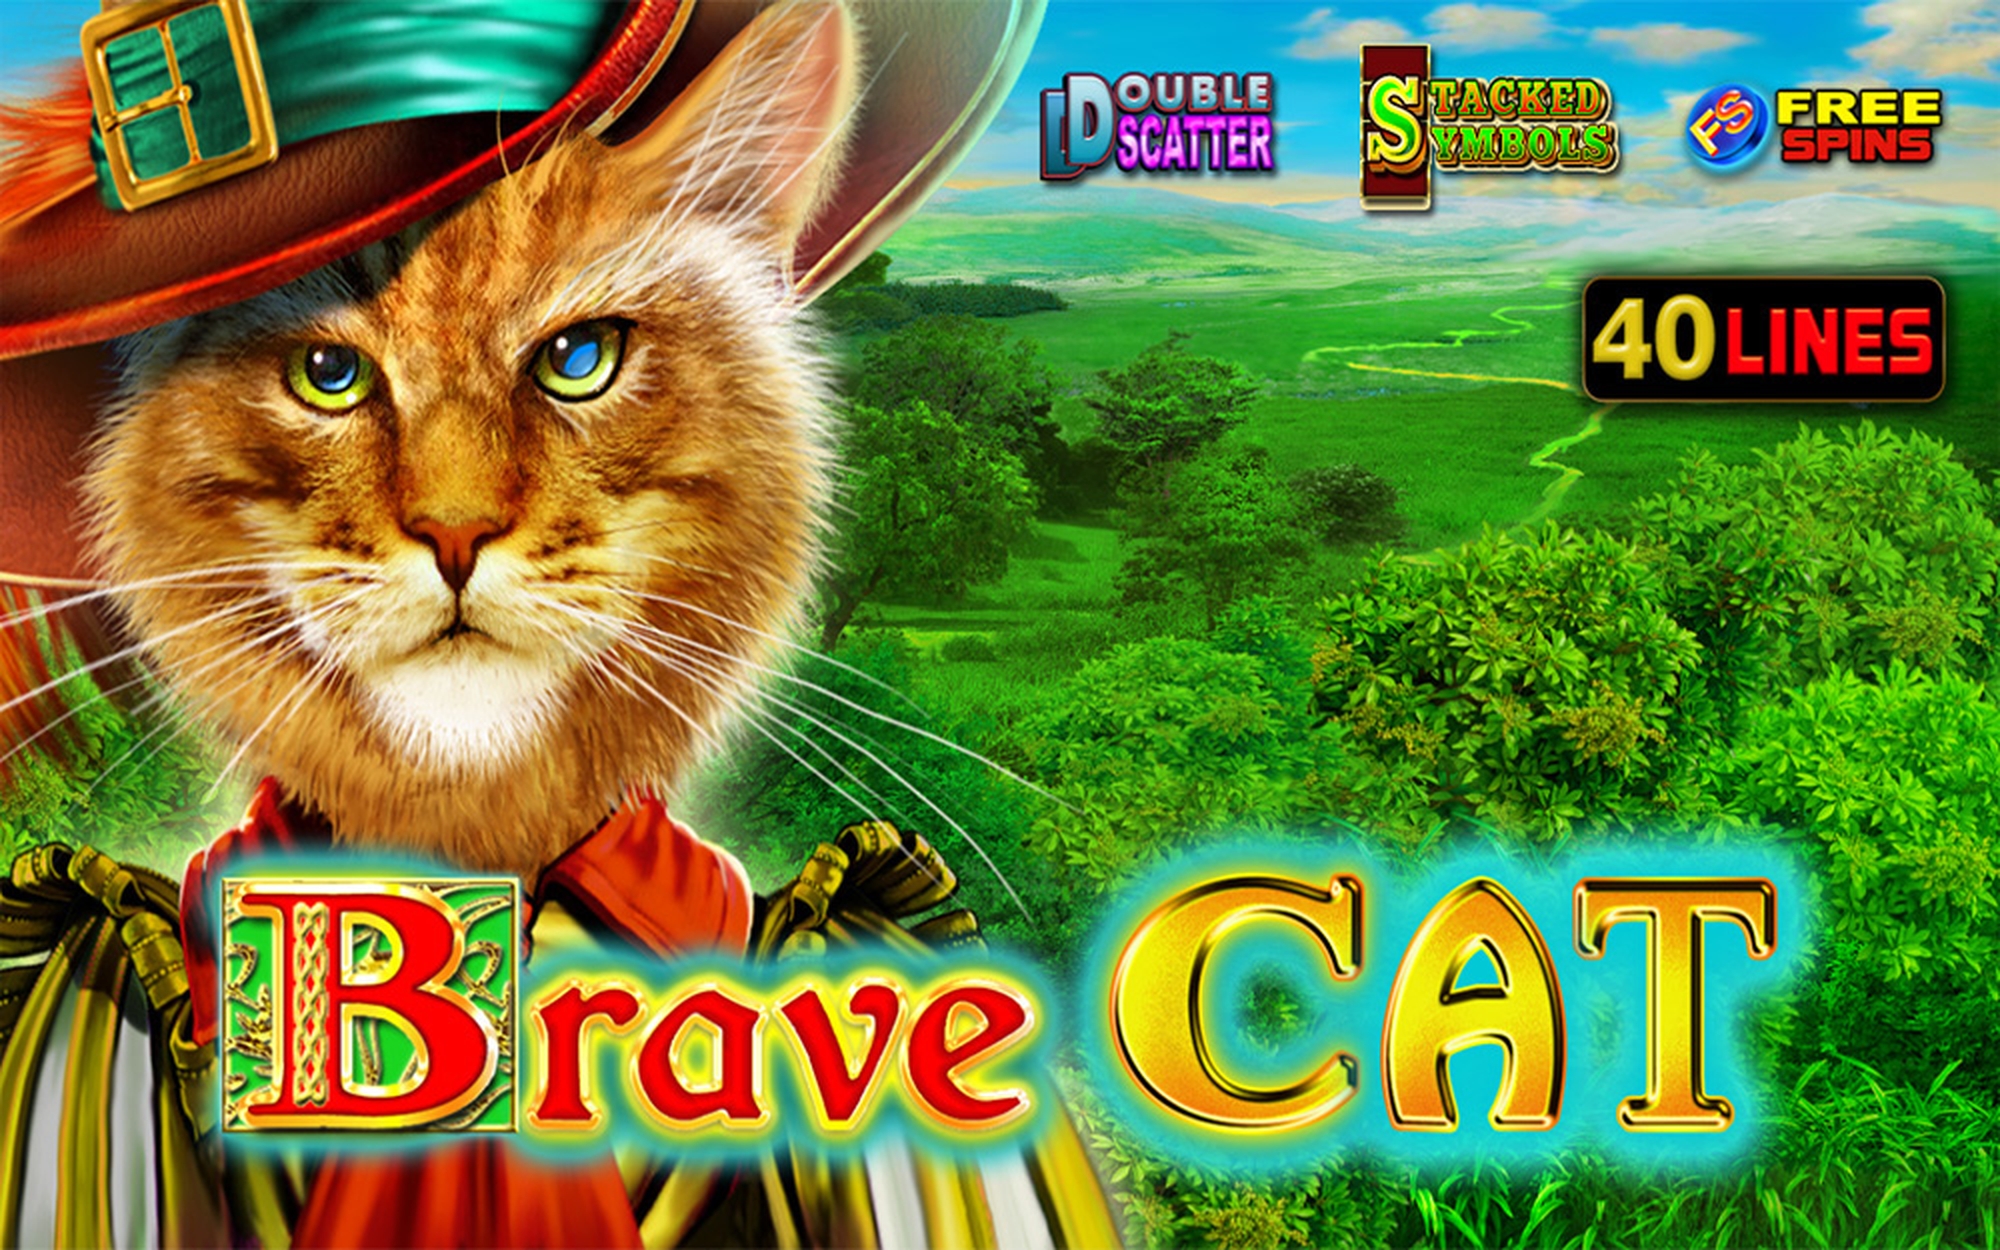 The Brave Cat Online Slot Demo Game by EGT